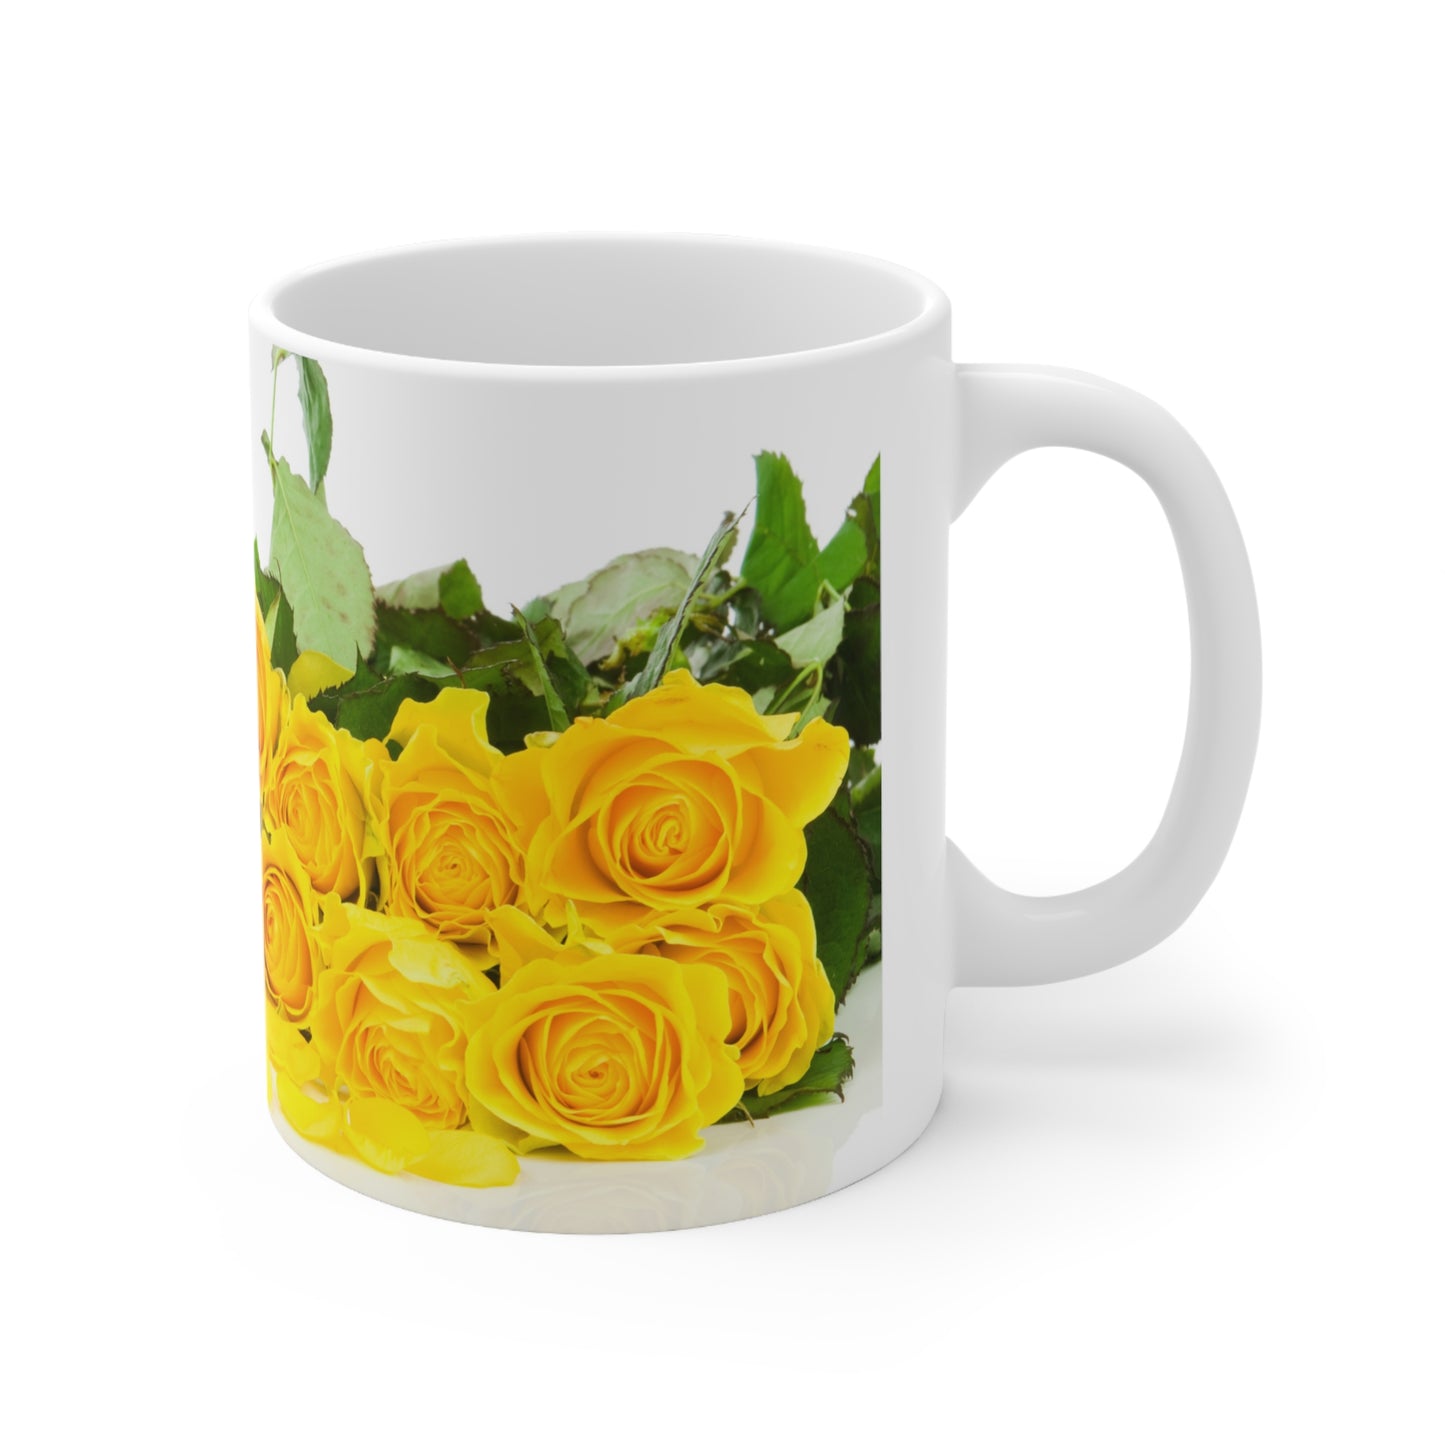 Give Mom a coffee cup that will remind her of your love every time she uses it. “I love you, Mom!” with beautiful yellow roses to brighten up her day.